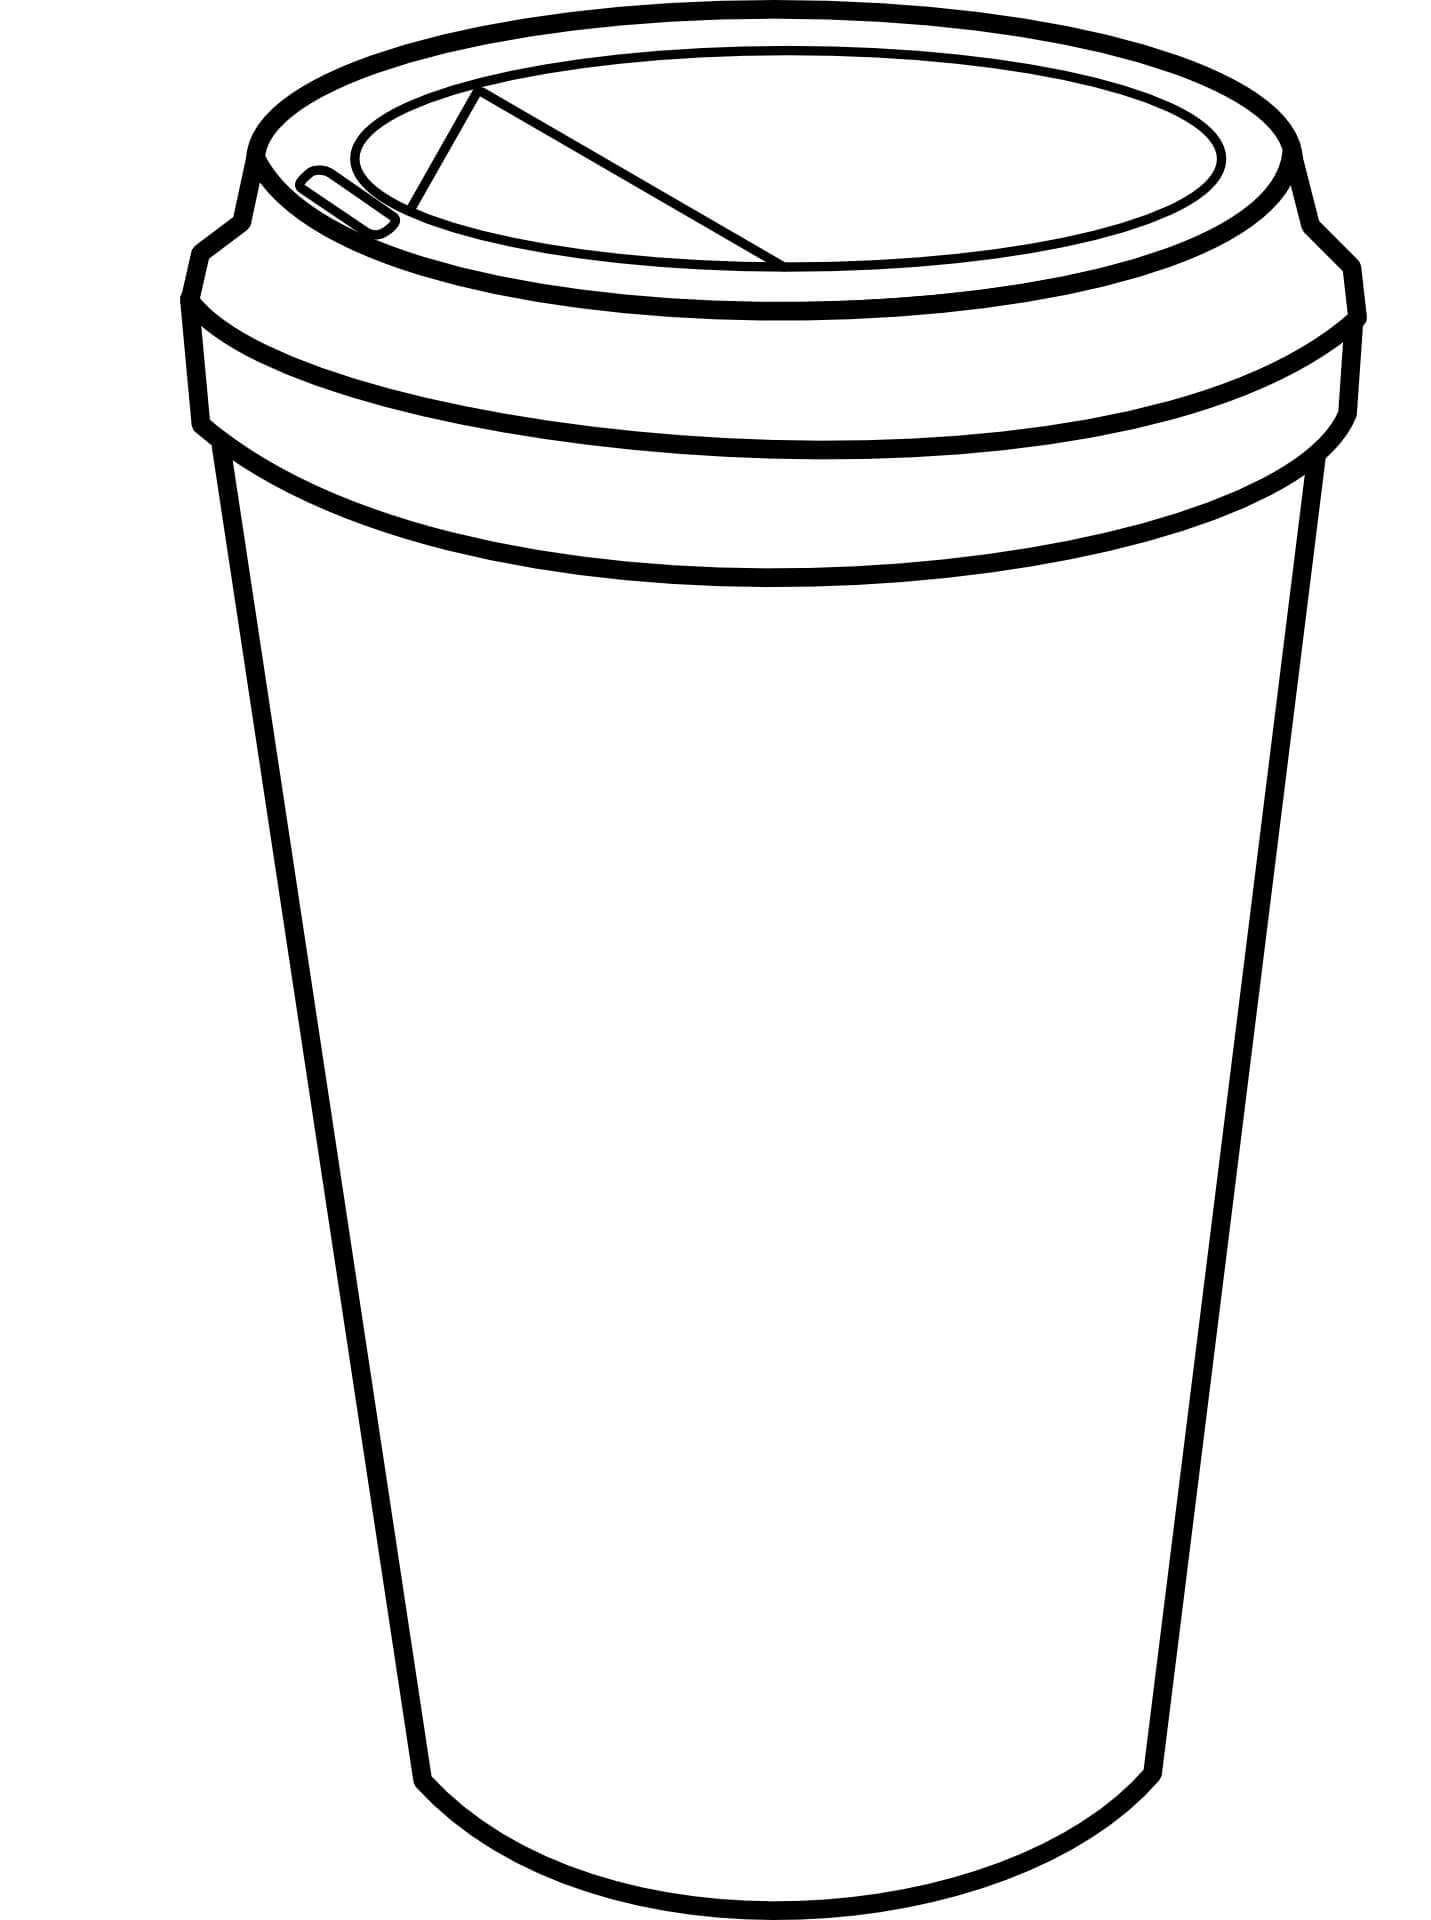 Cart Coffee Cup coloring page - Download, Print or Color Online for Free